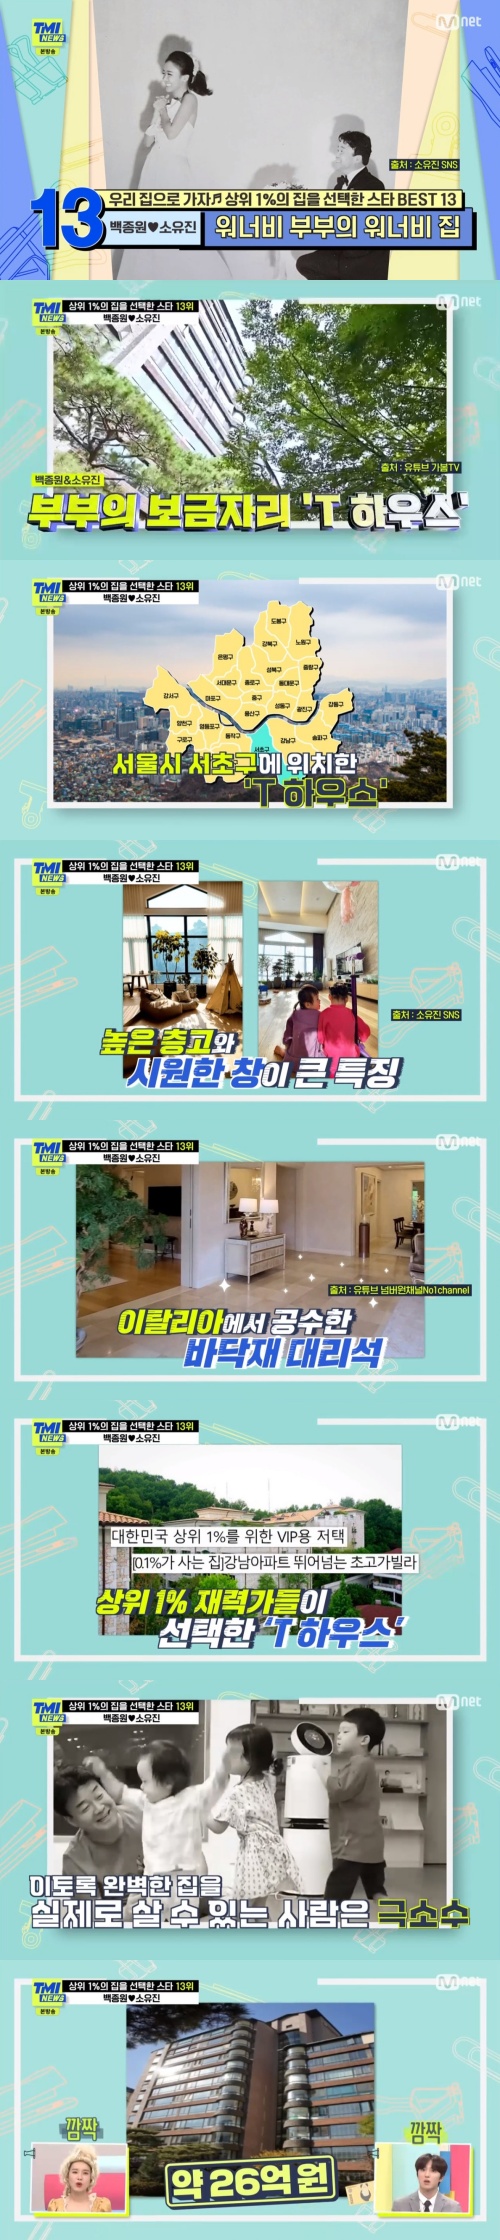 On the cable channel Mnet TMI News, the house of cooking researcher and broadcaster Baek Jong-won and actor Sooo-jin was introduced.In the 75th episode of TMI News broadcasted on the afternoon of the 14th, entertainers living in Dream House were illuminated with the theme of Star Best 13 who chose the top 1% house.The house of Baek Jong-won and So Yoo-jin, who ranked 13th in the top 1% house, was T House located in Seocho-gu, Seoul.It boasts a cool space with a high floor height, and it is said to boast a unique interior with the finest handmade products, foreign finishing materials and sauna.Especially, T House is known to have underground air radar shelter, and the admiration of the cast continued.The T House underground air radar, which was first introduced in domestic common House, is designed to allow more than 200 people to live for more than two months.The actual transaction price was about 2.6 billion won recently.